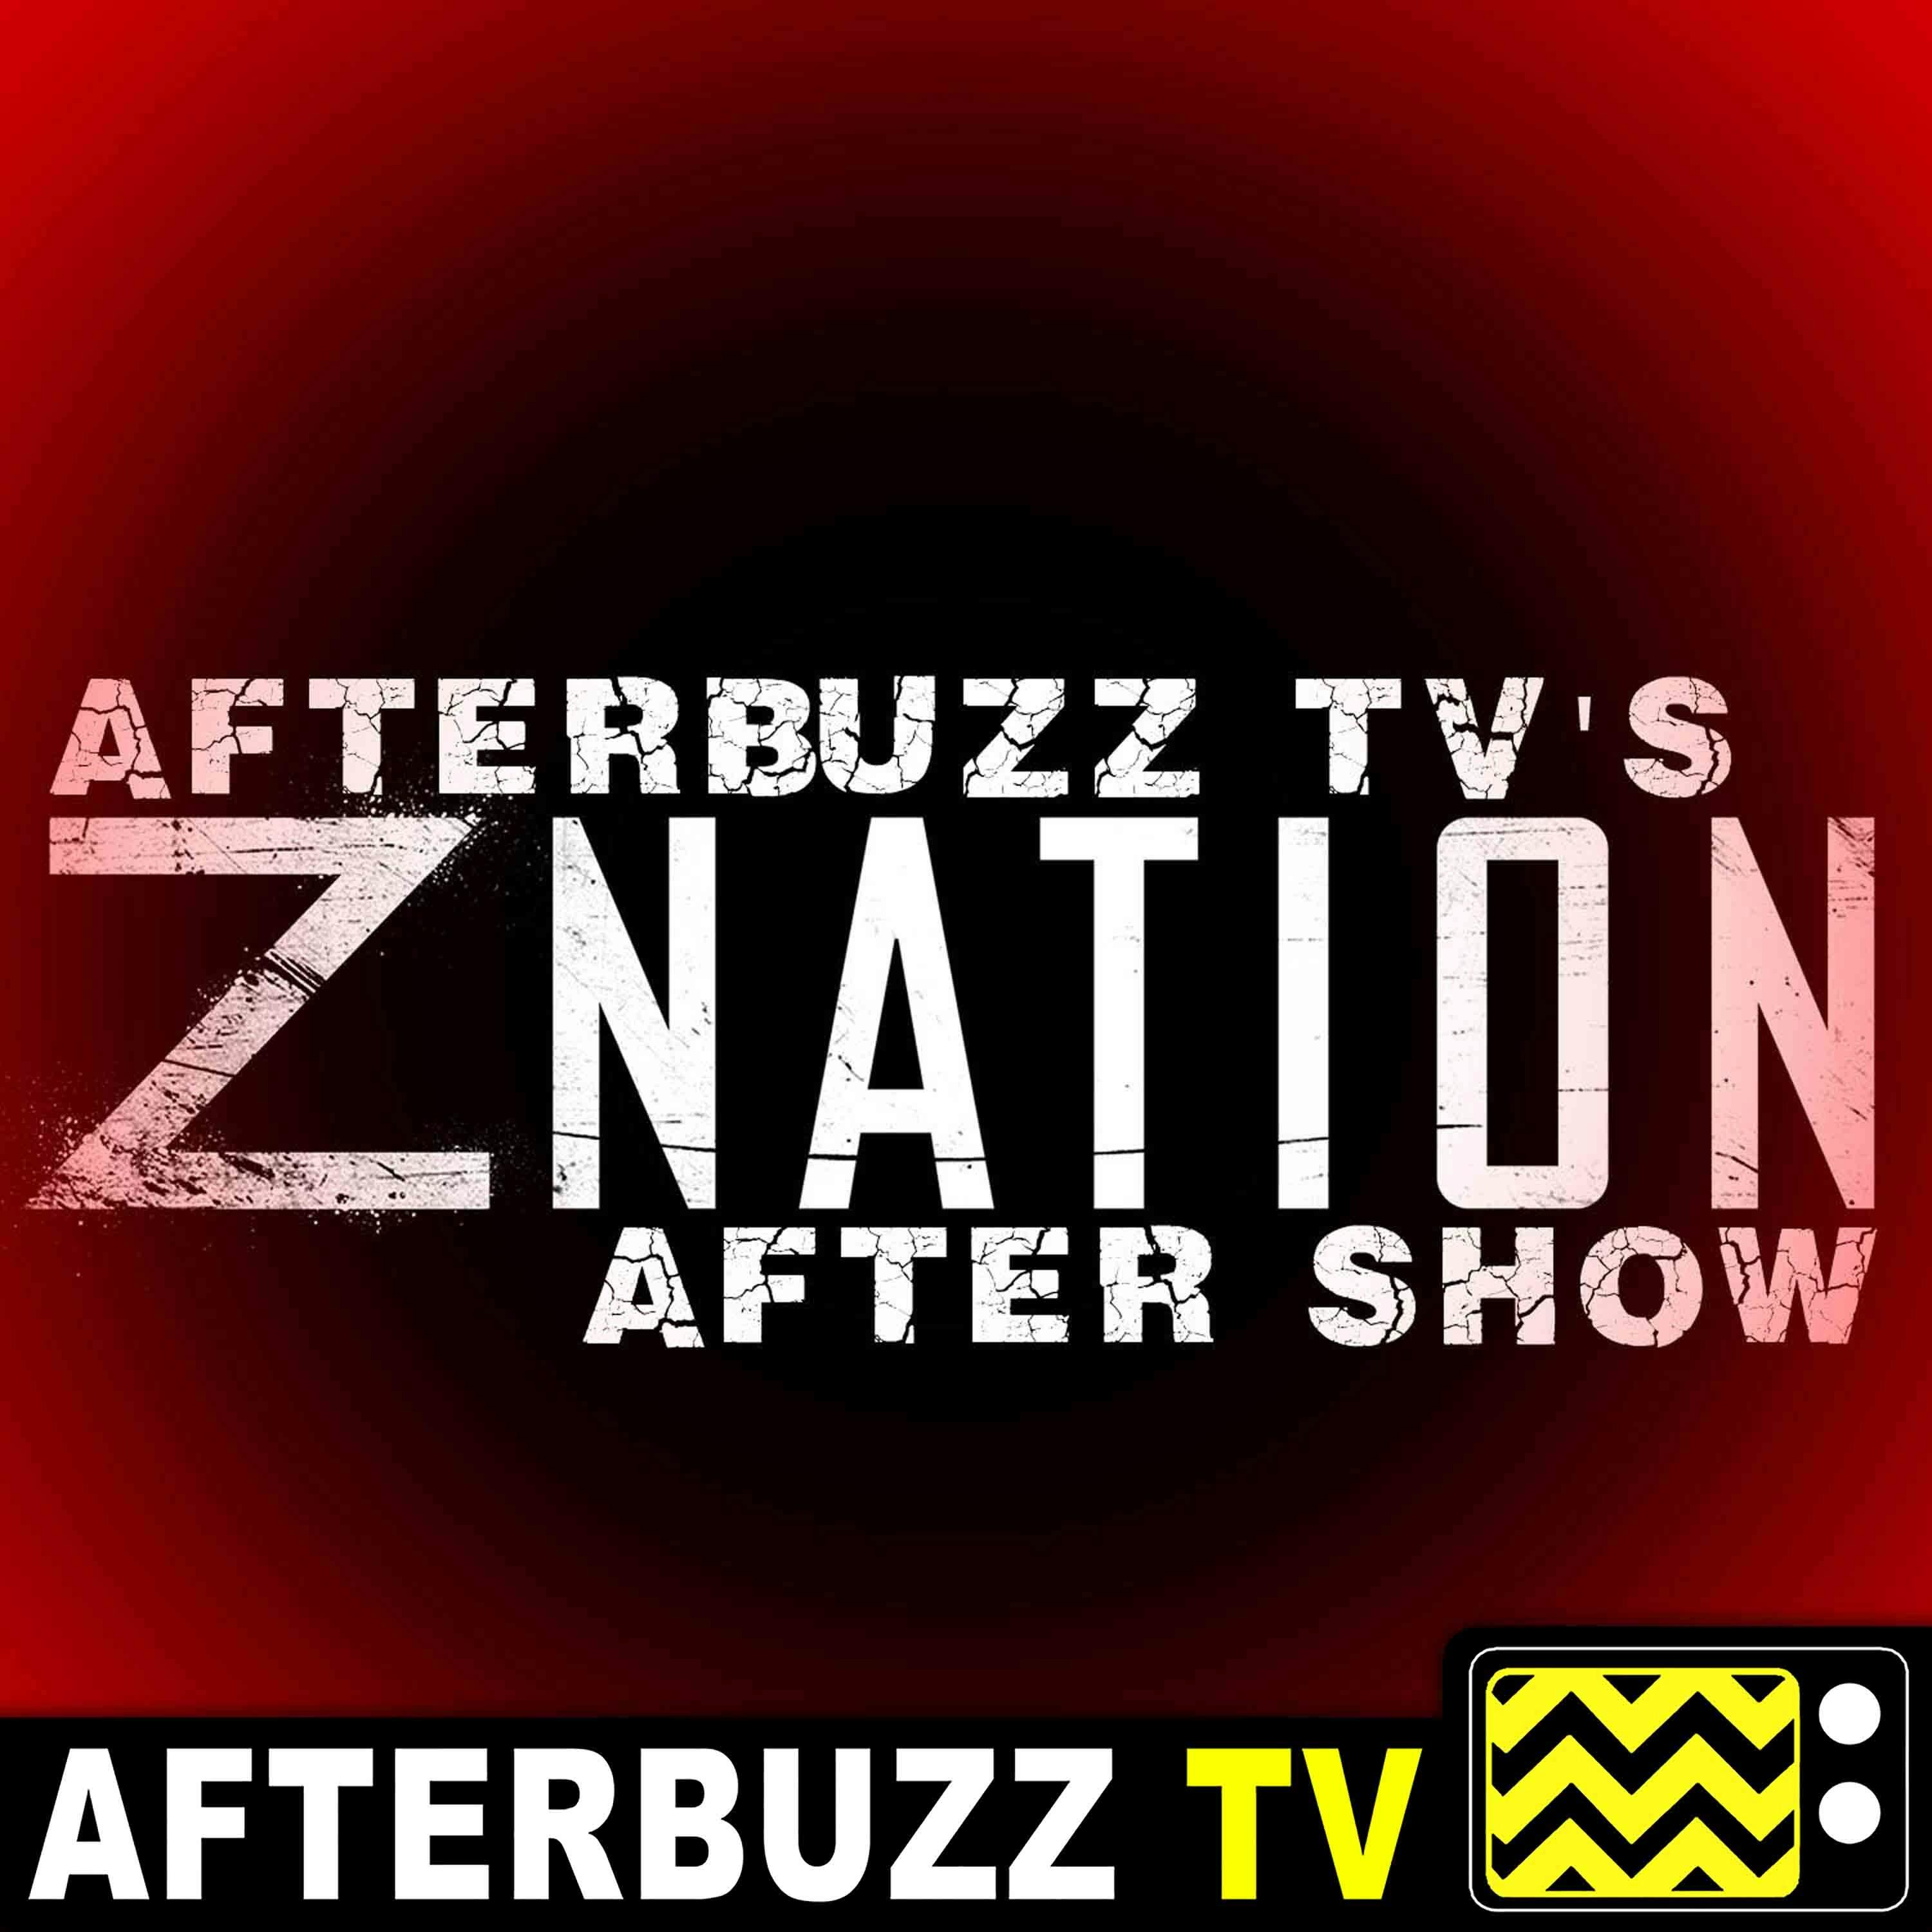 Z Nation S:4 | Karl Schaefer & Abram Cox Guest on Mt. Weather; The Black Rainbow E:12 & E:13 | AfterBuzz TV AfterShow